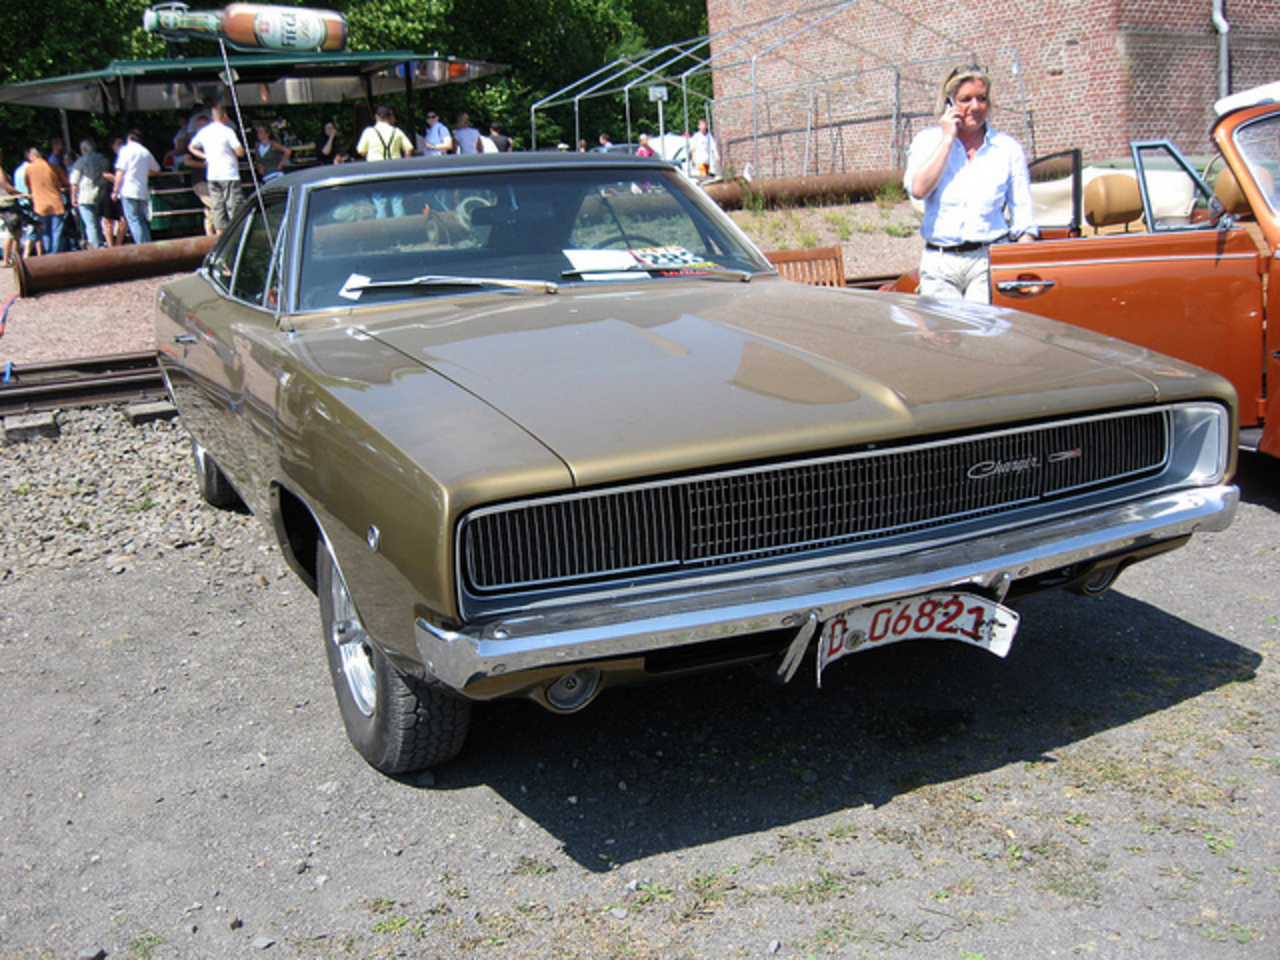 Dodge Charger 383 1968 | Flickr - Photo Sharing!